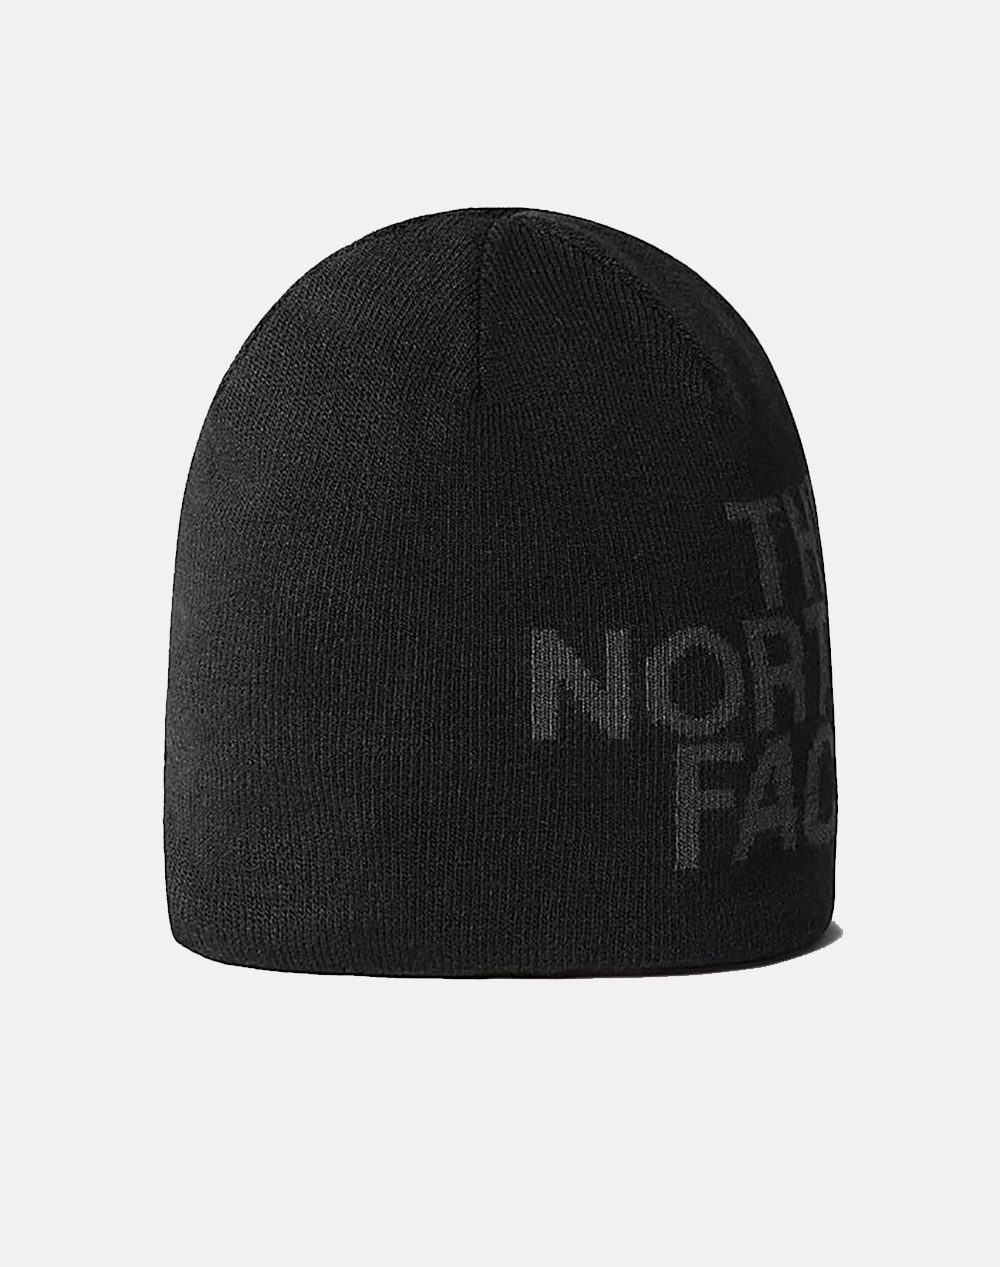 THE NORTH FACE THE NORTH FACE REV TNF BANNER BNE NF00AKND-NFKT0 Black